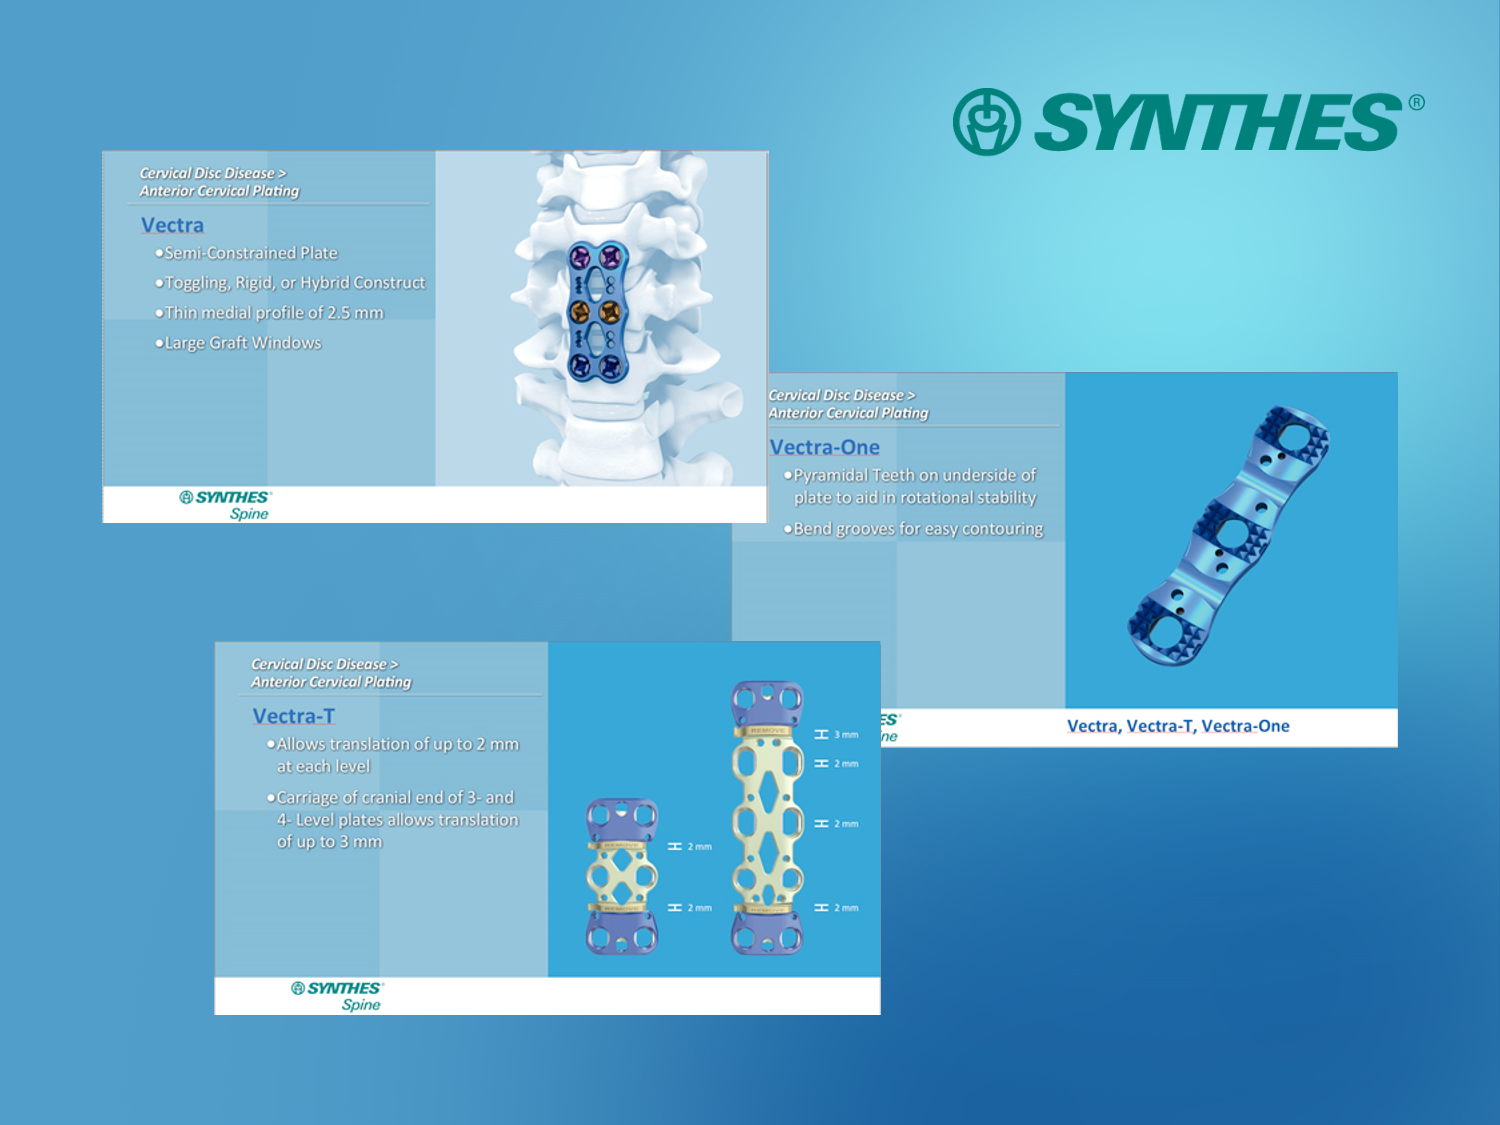 Synthes Brand 2